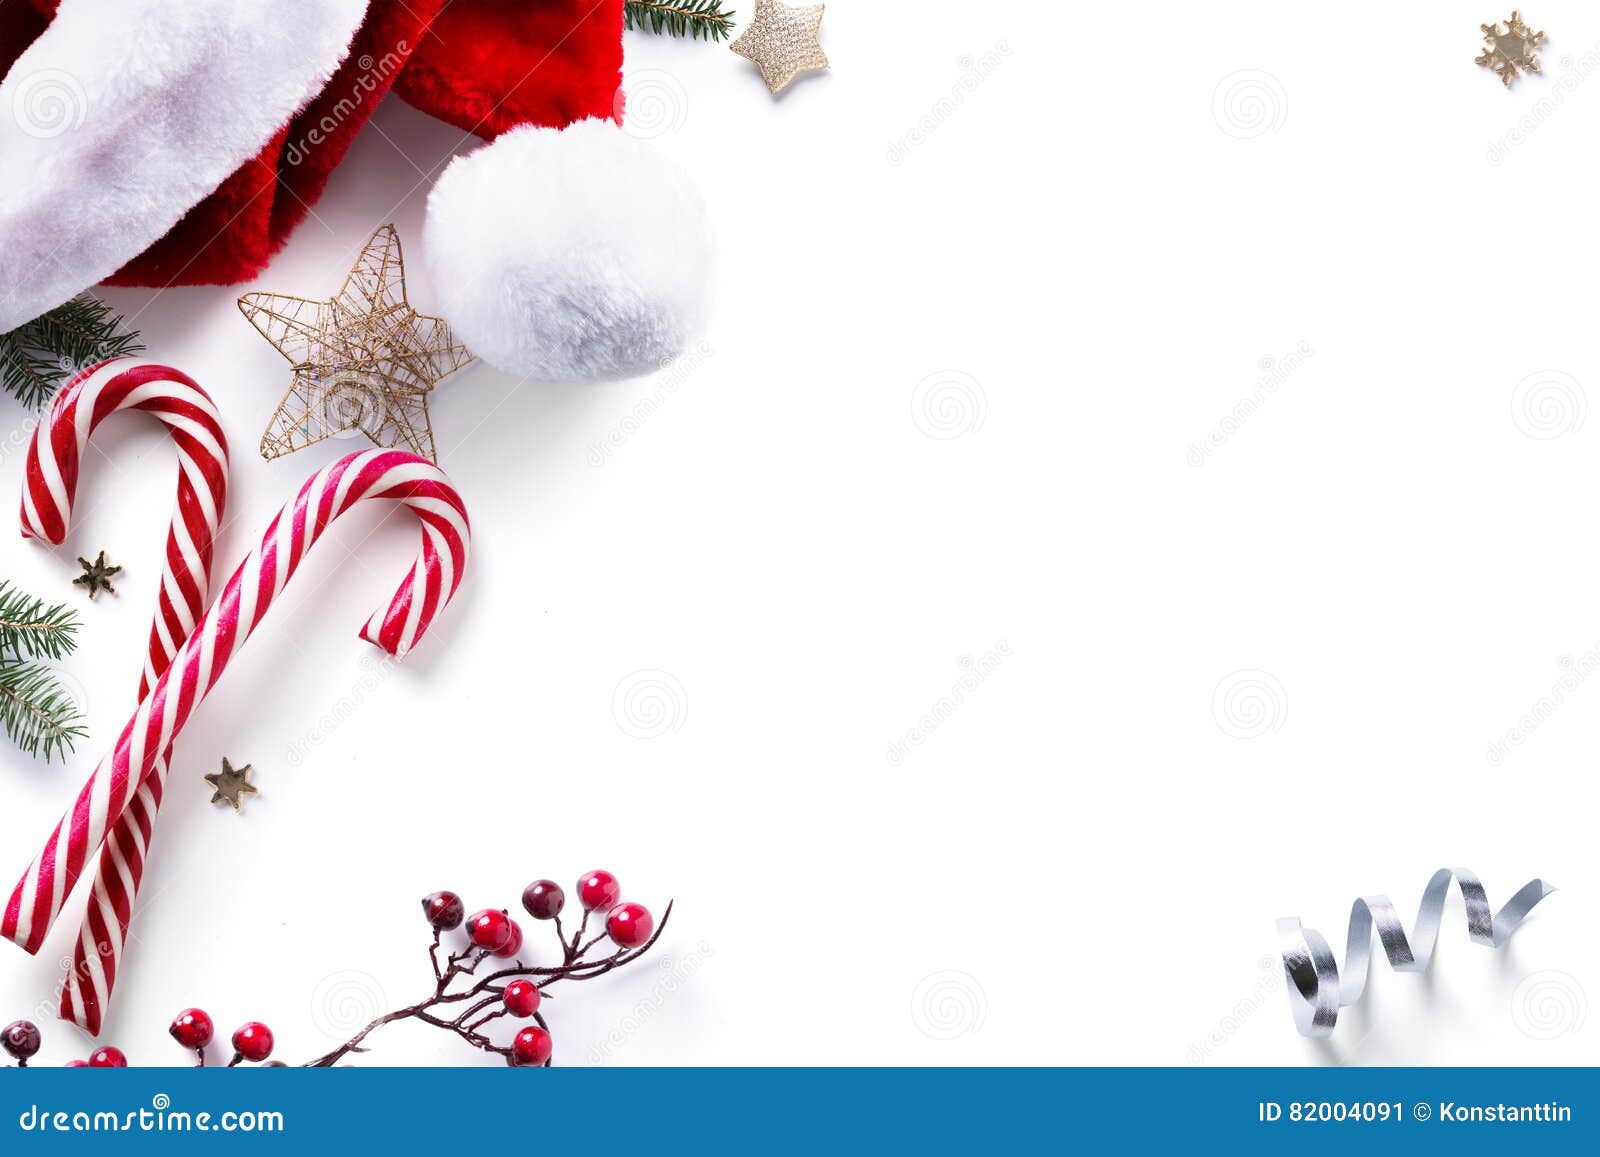 christmas decorations and holidays sweet on white background